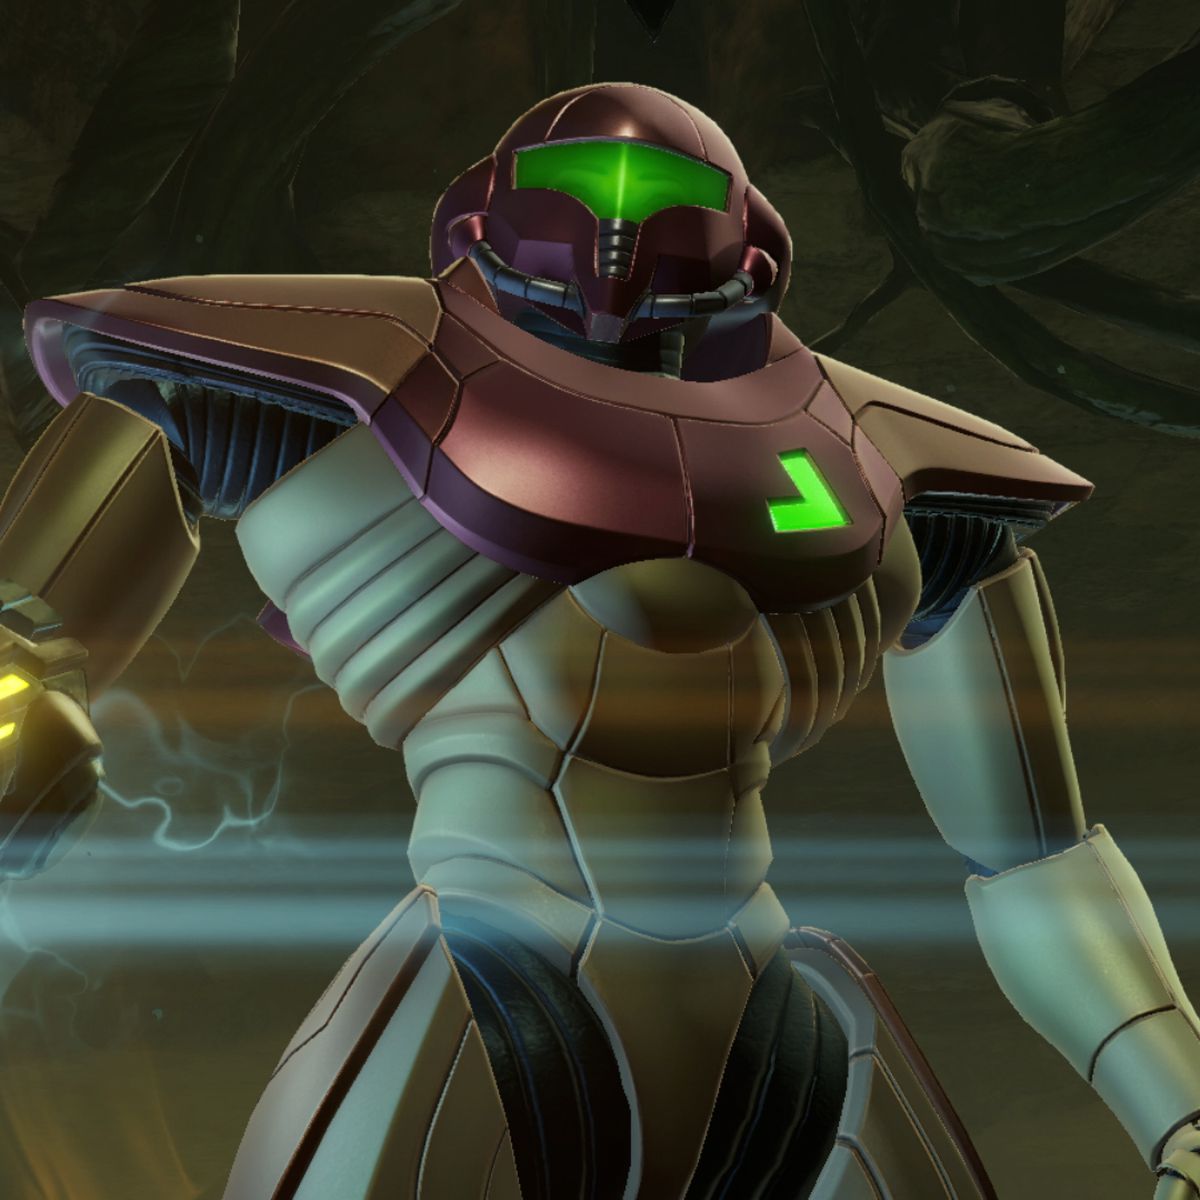 Space bounty hunter Samus stands in her iconic suit of armor in Metroid Prime Remastered